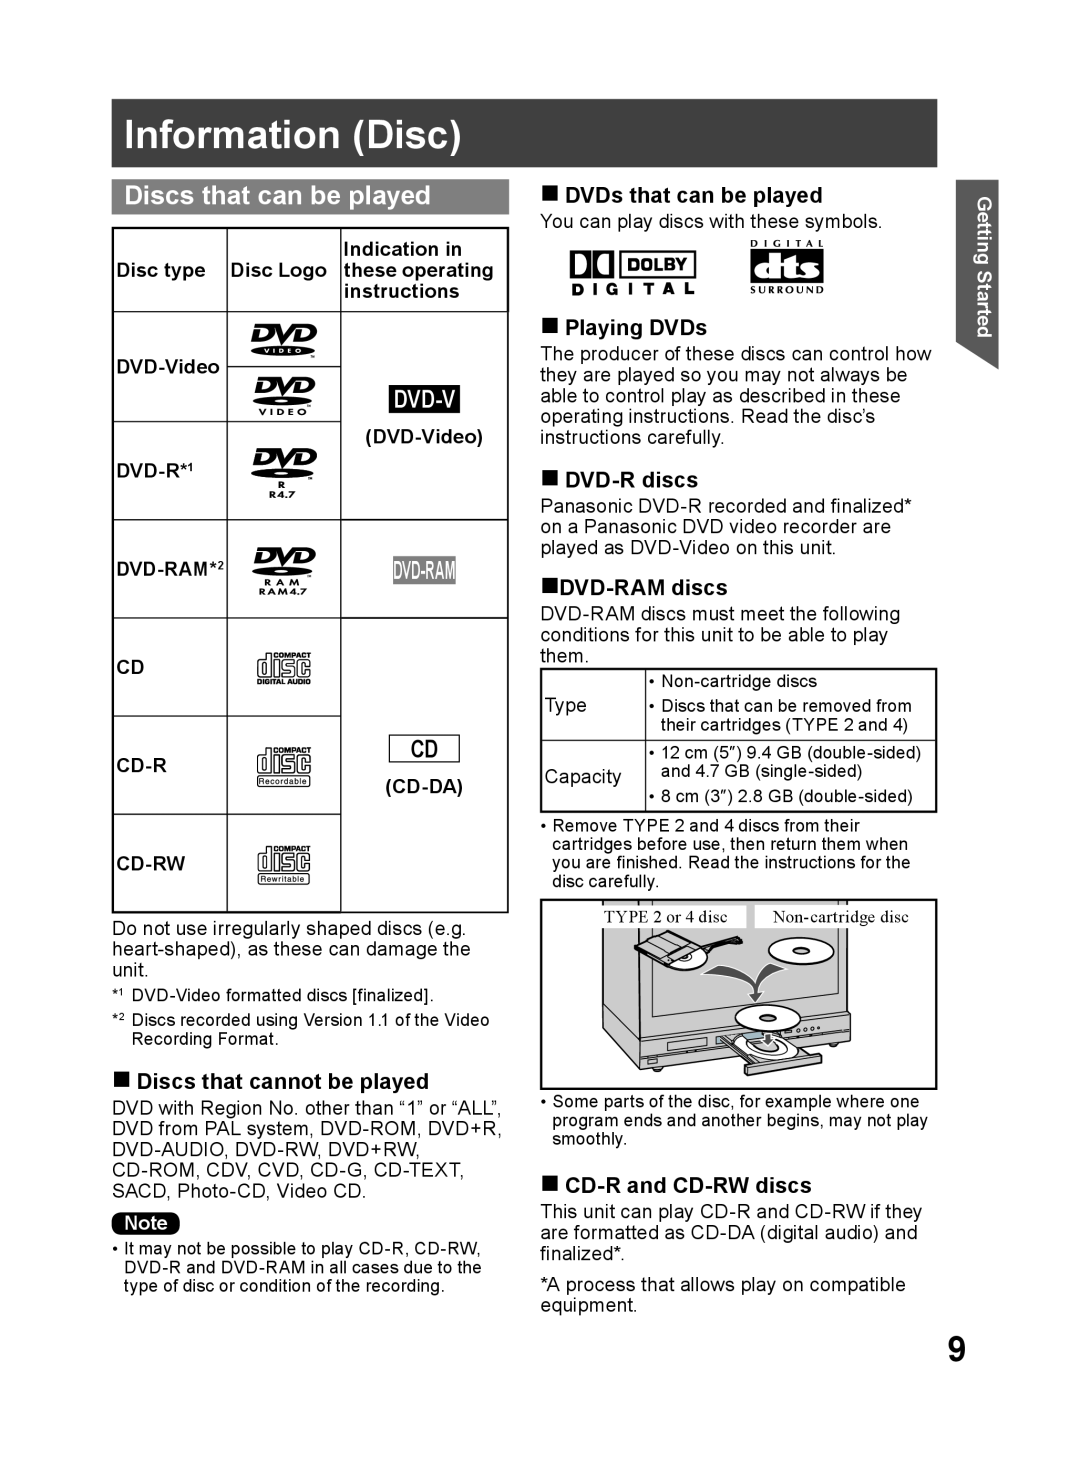 Panasonic PV DF2704 Information Disc, Discs that can be played, Discs that cannot be played, DVDs that can be played, Cd-R 